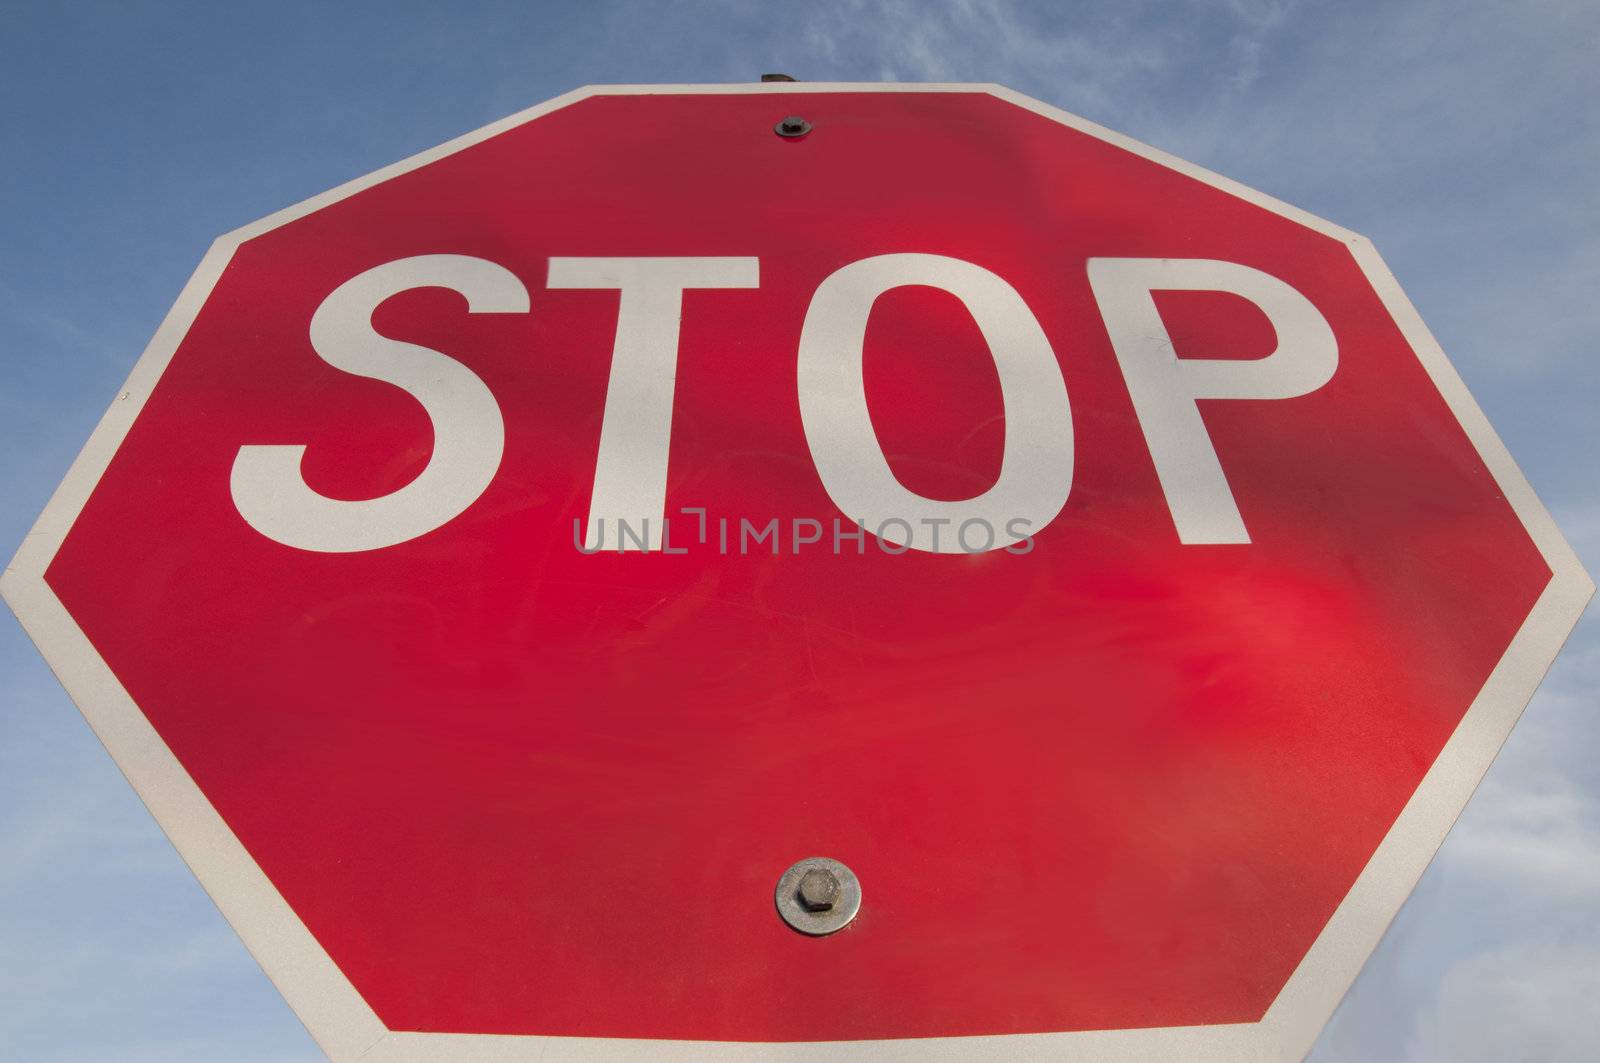 Image of a stop sign against a blue sky background.